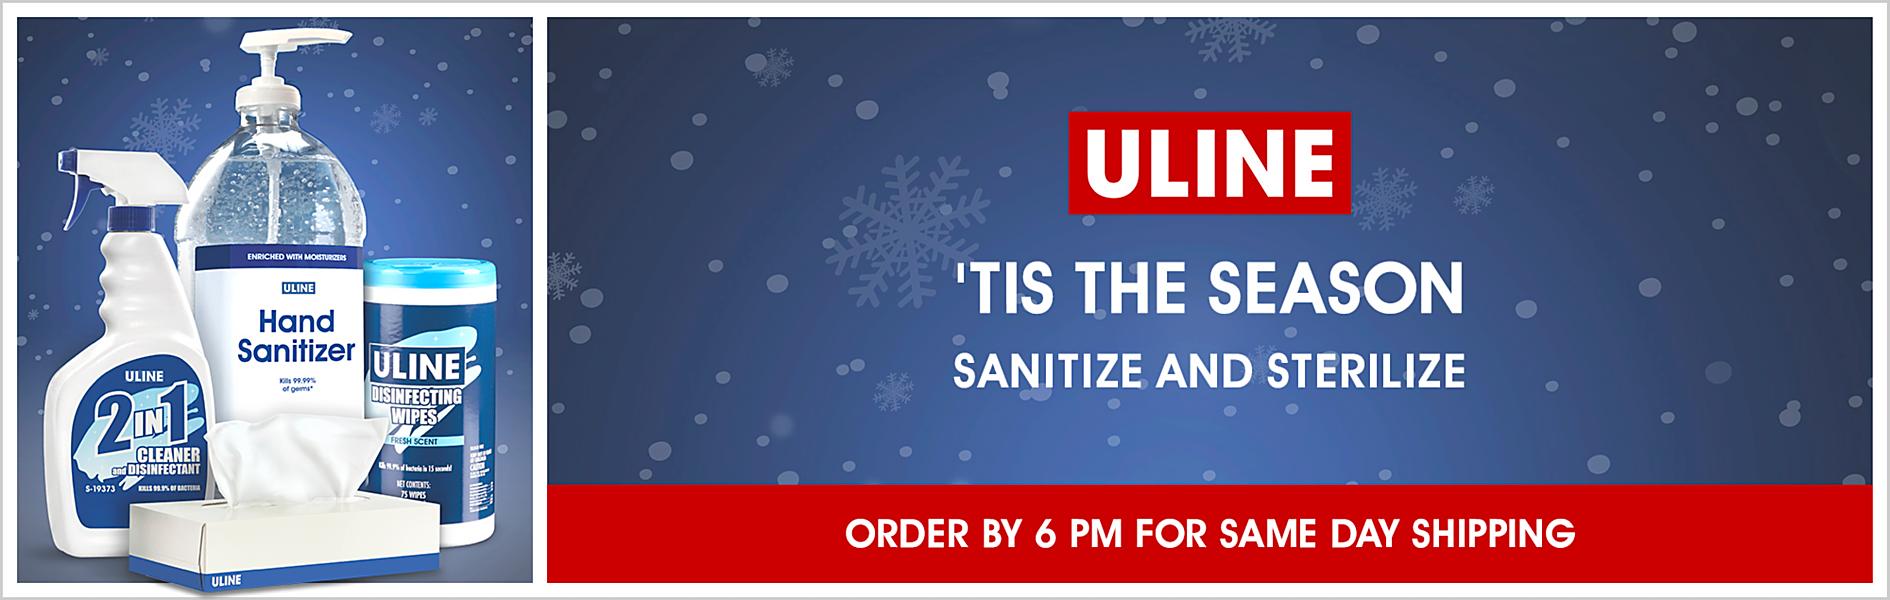 Uline - Flu Fighters - Tackle Winter Like a Rock Star - Order by 6 PM For Same Day Shipping